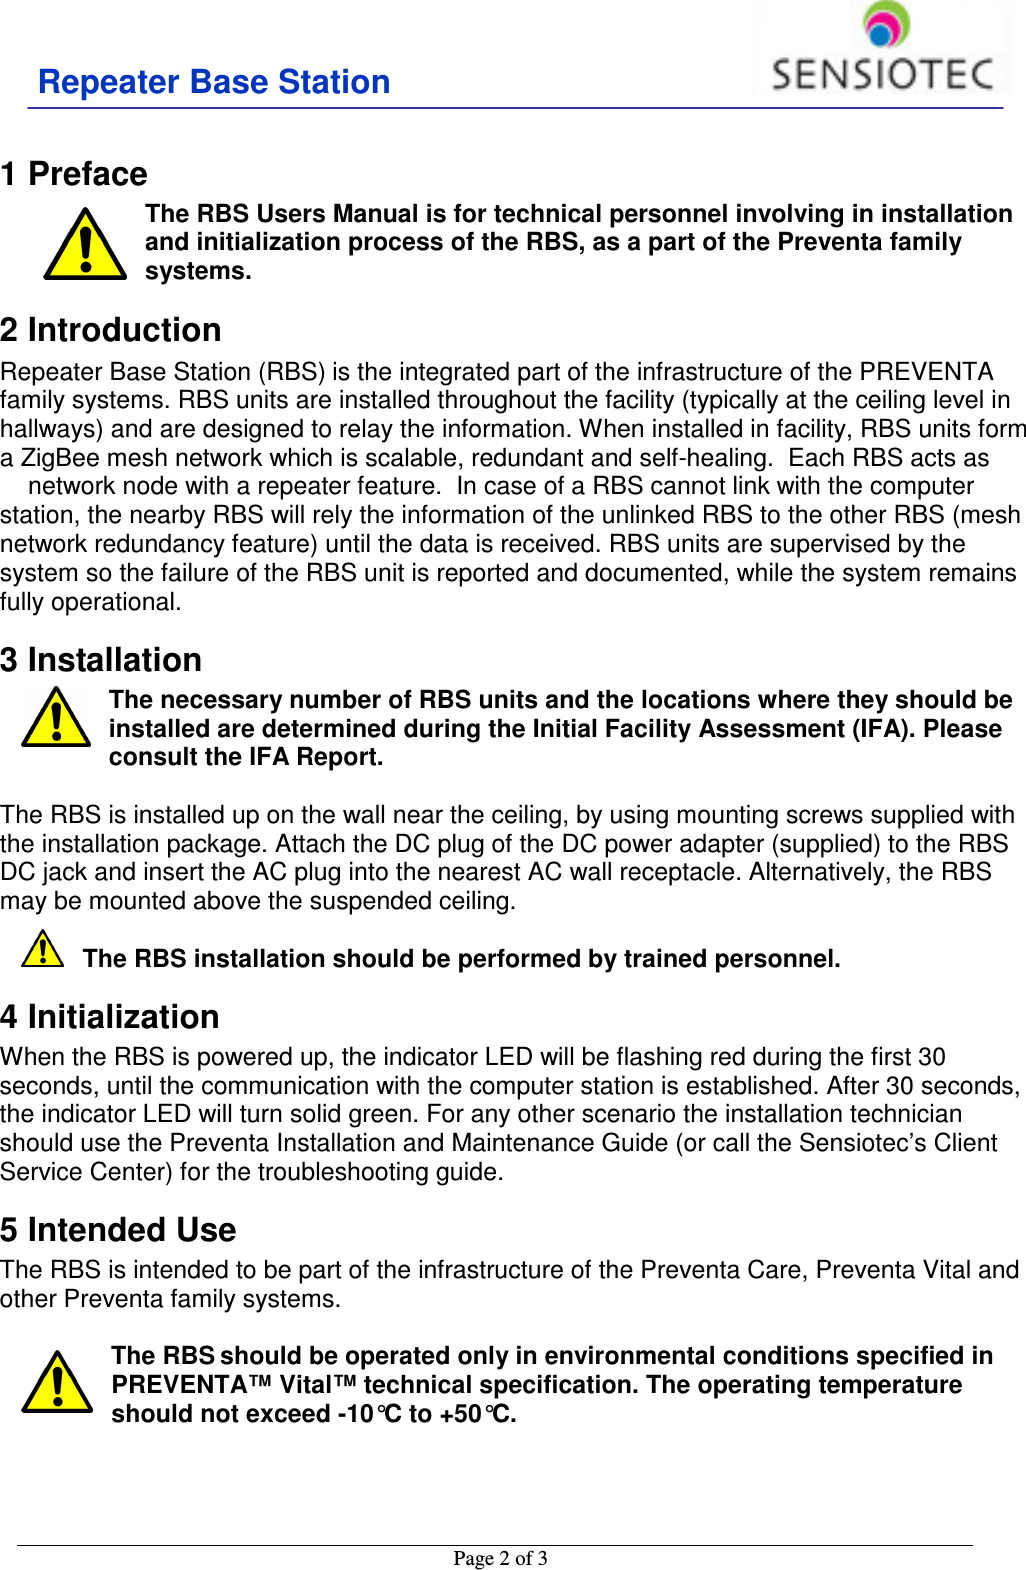 Repeater Base Station                                           Page 2 of 3    1 Preface The RBS Users Manual is for technical personnel involving in installation and initialization process of the RBS, as a part of the Preventa family systems.  2 Introduction Repeater Base Station (RBS) is the integrated part of the infrastructure of the PREVENTA family systems. RBS units are installed throughout the facility (typically at the ceiling level in hallways) and are designed to relay the information. When installed in facility, RBS units form a ZigBee mesh network which is scalable, redundant and self-healing.  Each RBS acts as  network node with a repeater feature.  In case of a RBS cannot link with the computer station, the nearby RBS will rely the information of the unlinked RBS to the other RBS (mesh network redundancy feature) until the data is received. RBS units are supervised by the system so the failure of the RBS unit is reported and documented, while the system remains fully operational. 3 Installation The necessary number of RBS units and the locations where they should be installed are determined during the Initial Facility Assessment (IFA). Please consult the IFA Report.   The RBS is installed up on the wall near the ceiling, by using mounting screws supplied with the installation package. Attach the DC plug of the DC power adapter (supplied) to the RBS DC jack and insert the AC plug into the nearest AC wall receptacle. Alternatively, the RBS may be mounted above the suspended ceiling.  The RBS installation should be performed by trained personnel.  4 Initialization When the RBS is powered up, the indicator LED will be flashing red during the first 30 seconds, until the communication with the computer station is established. After 30 seconds, the indicator LED will turn solid green. For any other scenario the installation technician should use the Preventa Installation and Maintenance Guide (or call the Sensiotec’s Client Service Center) for the troubleshooting guide.  5 Intended Use The RBS is intended to be part of the infrastructure of the Preventa Care, Preventa Vital and other Preventa family systems.   The RBS should be operated only in environmental conditions specified in PREVENTA™ Vital™ technical specification. The operating temperature should not exceed -10°C to +50°C.    